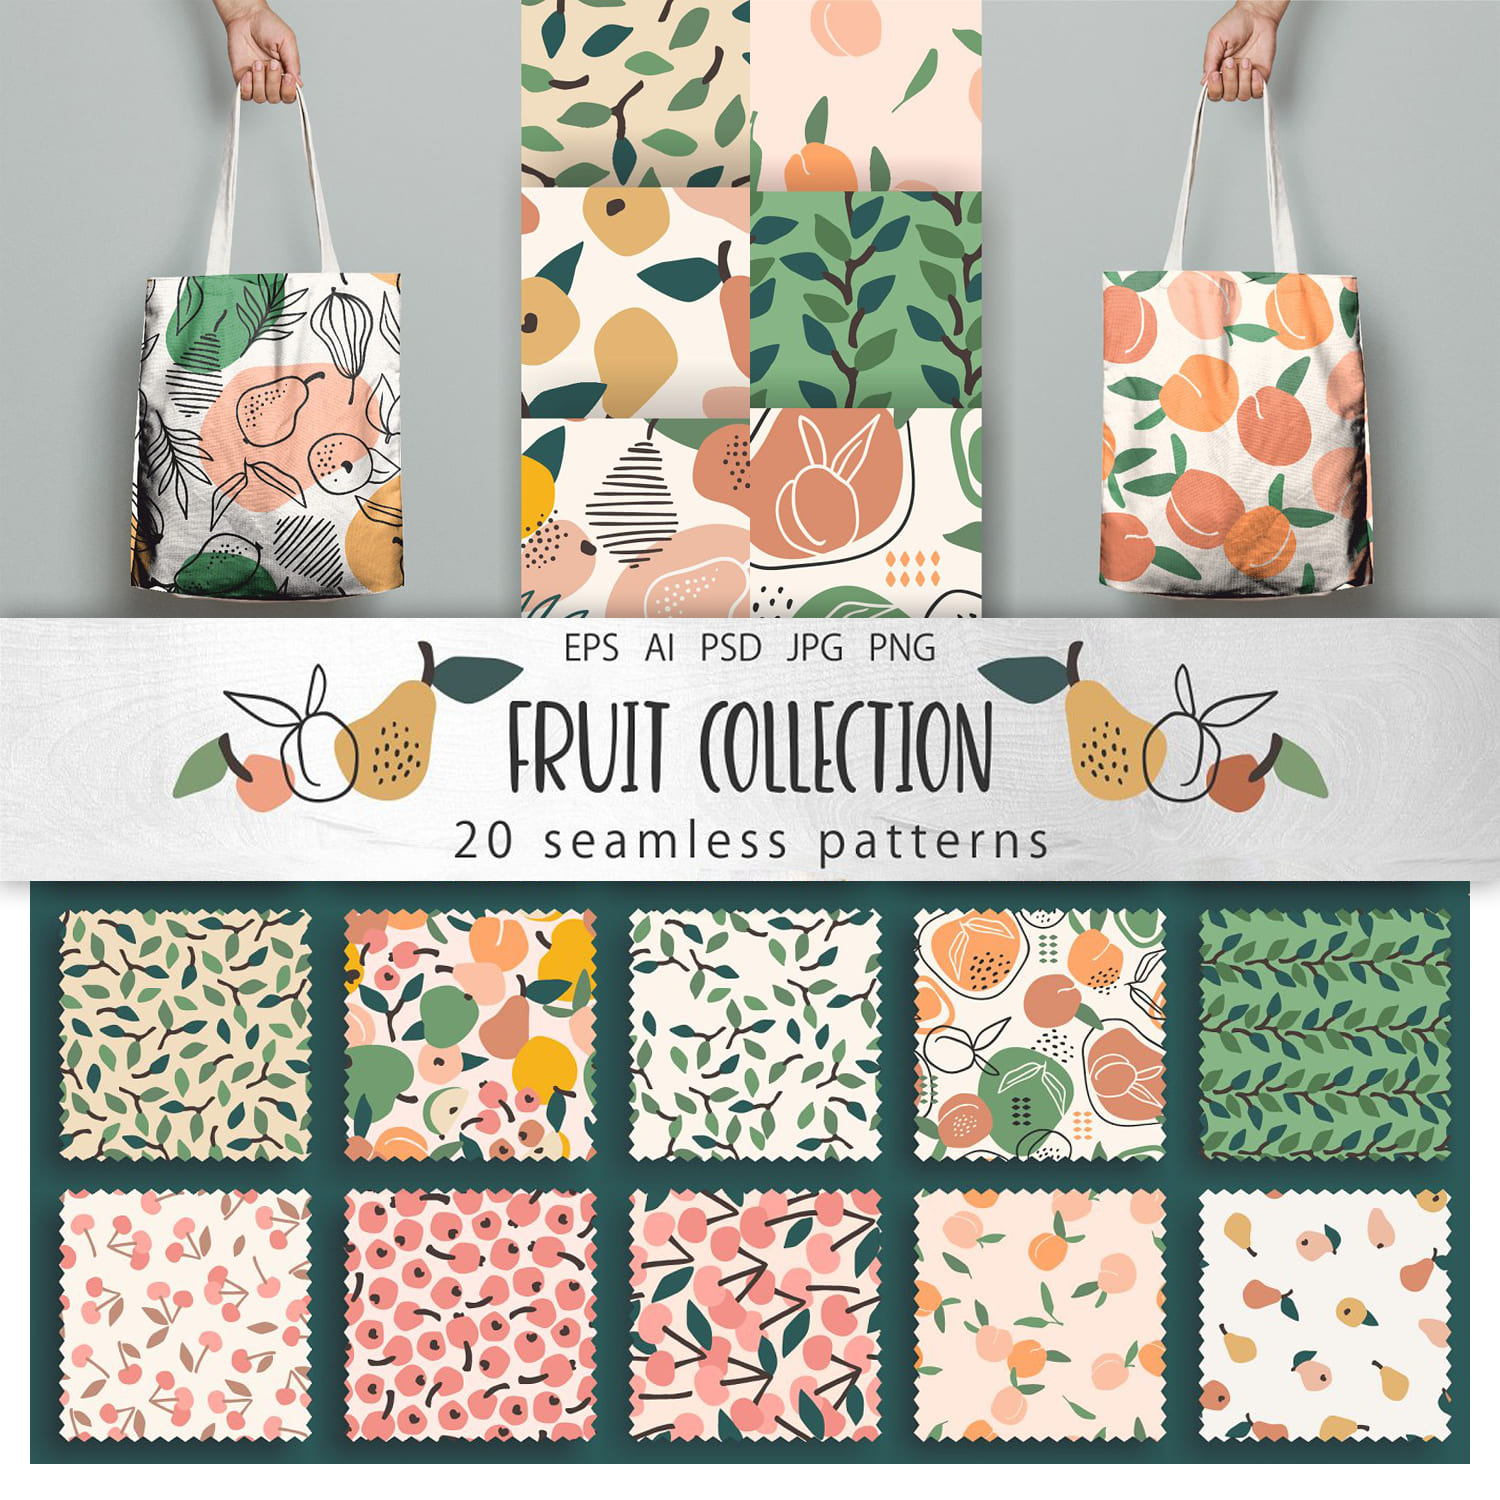 Fruit Collection 20 Patterns cover image.